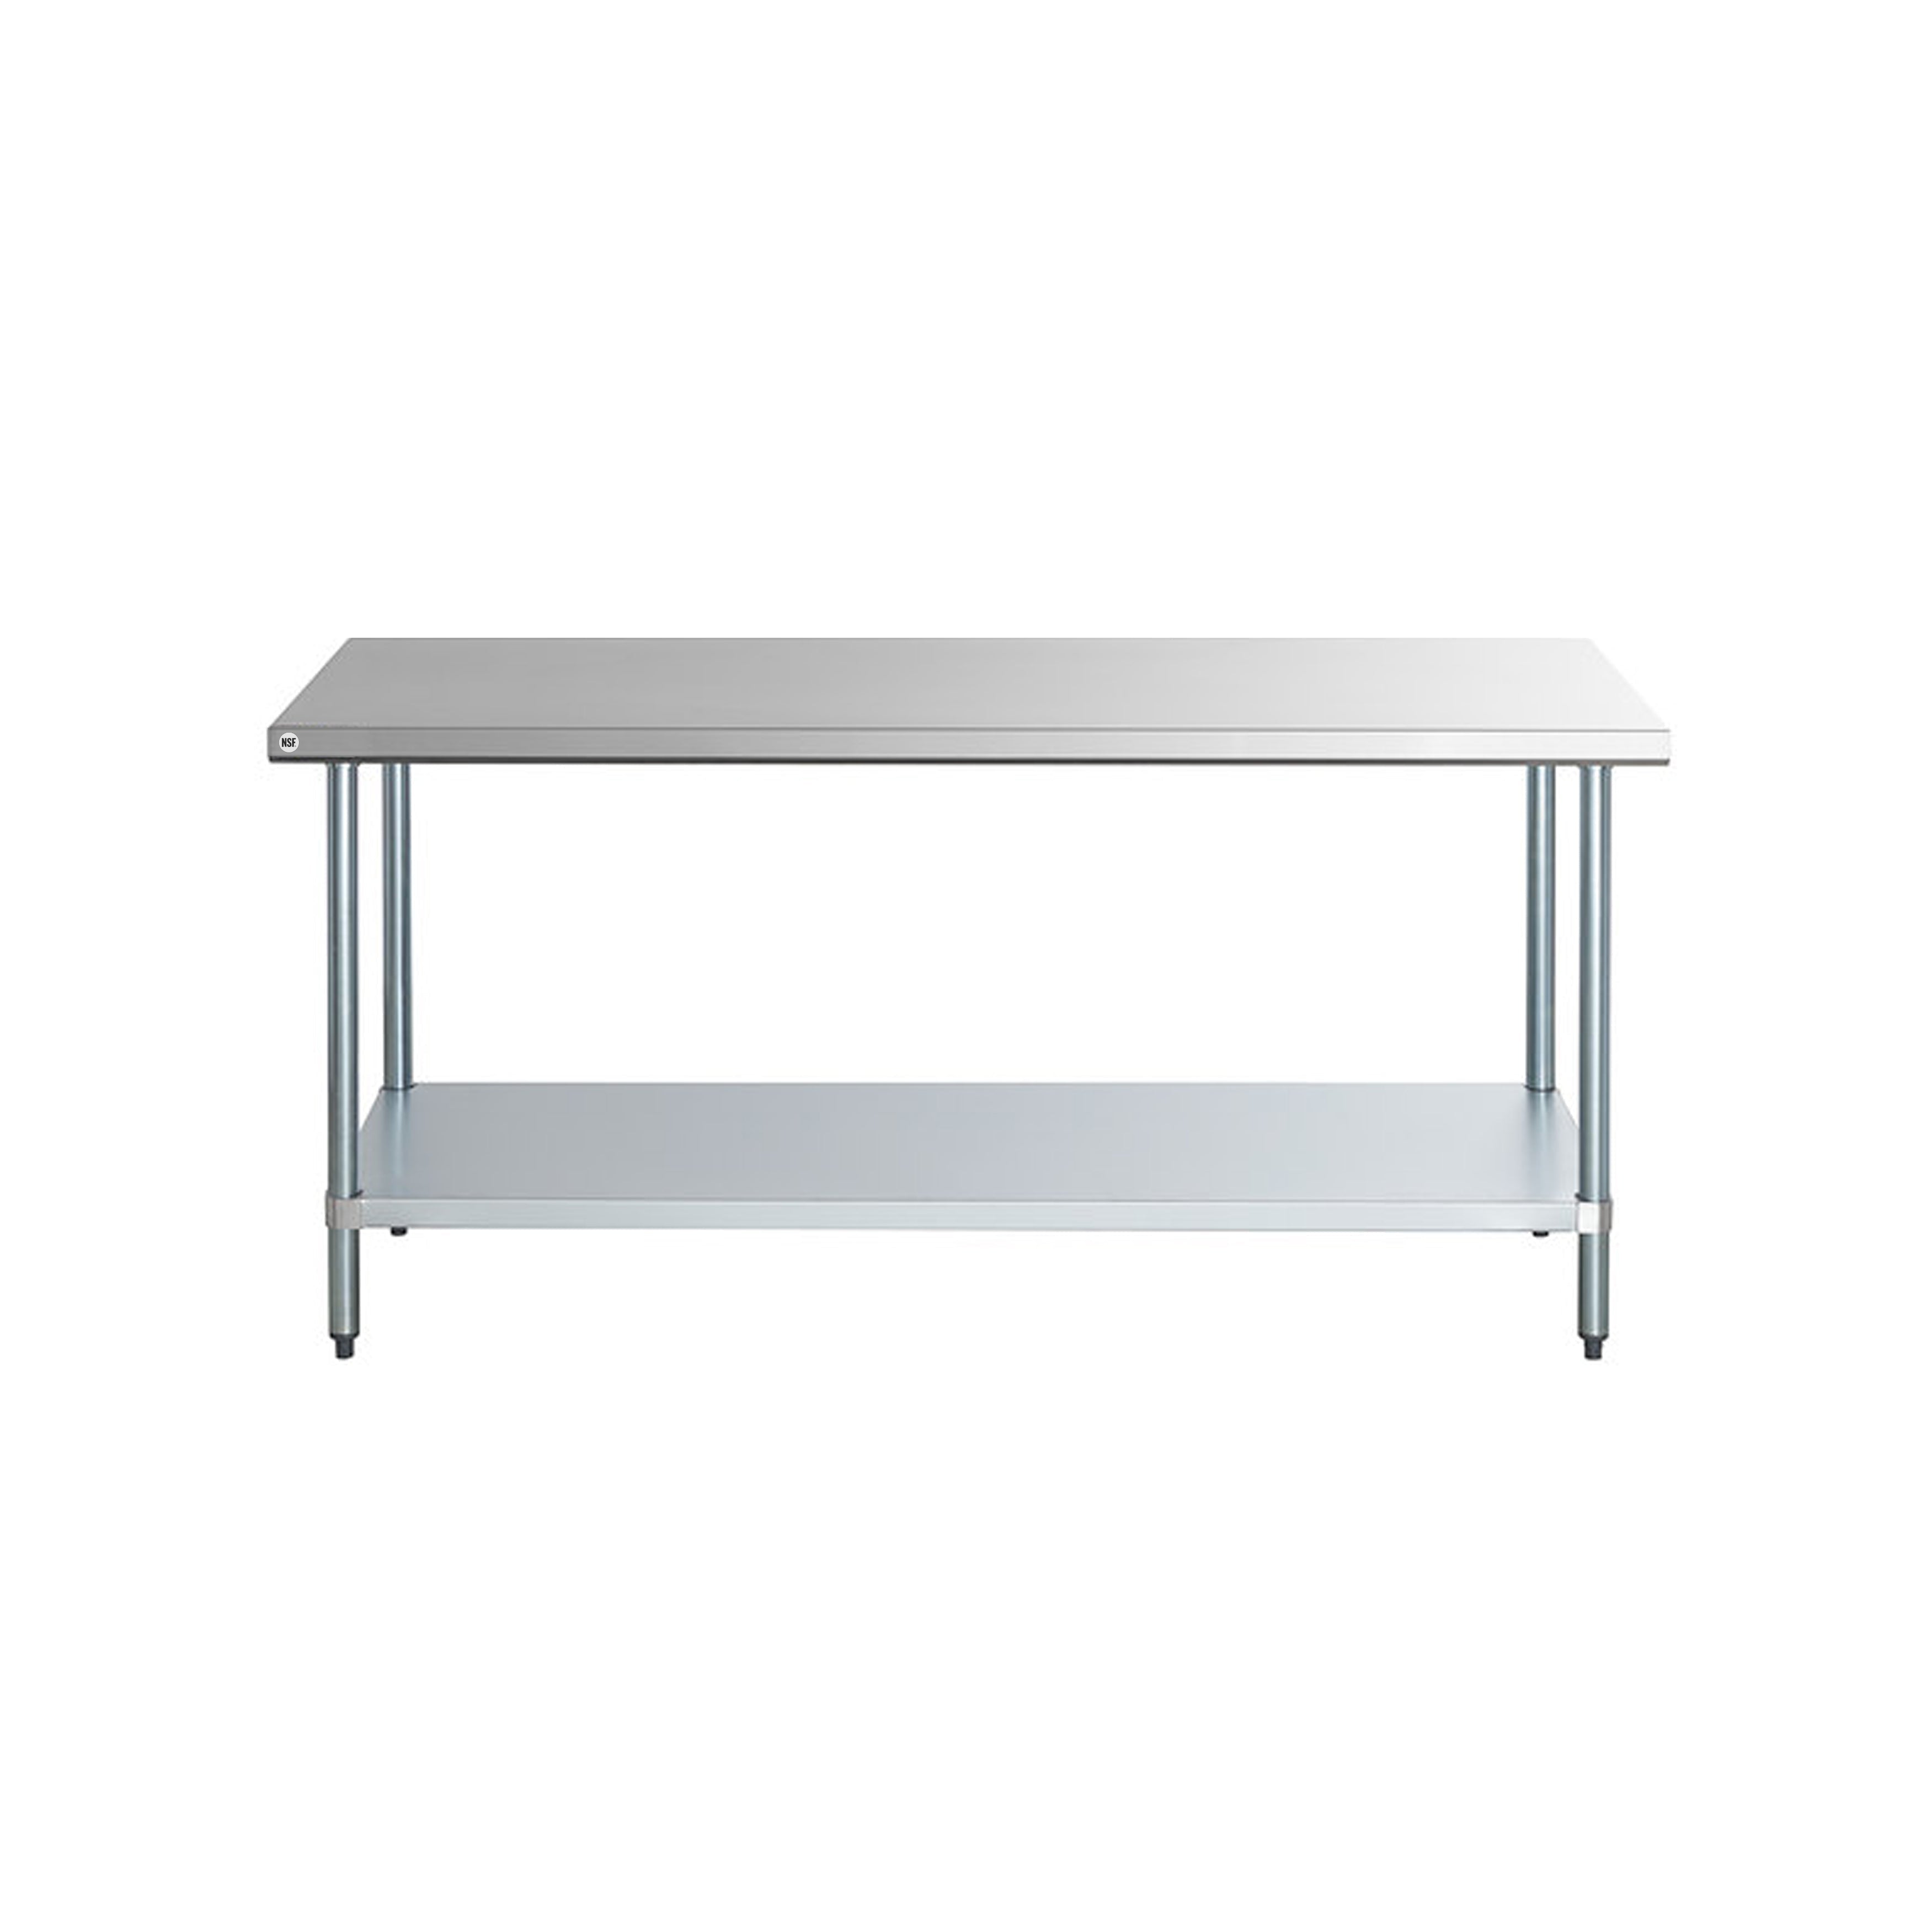 Omcan - 22067, Commercial 24" x 60" Stainless Steel Kitchen Work Table 1100lbs Light Duty